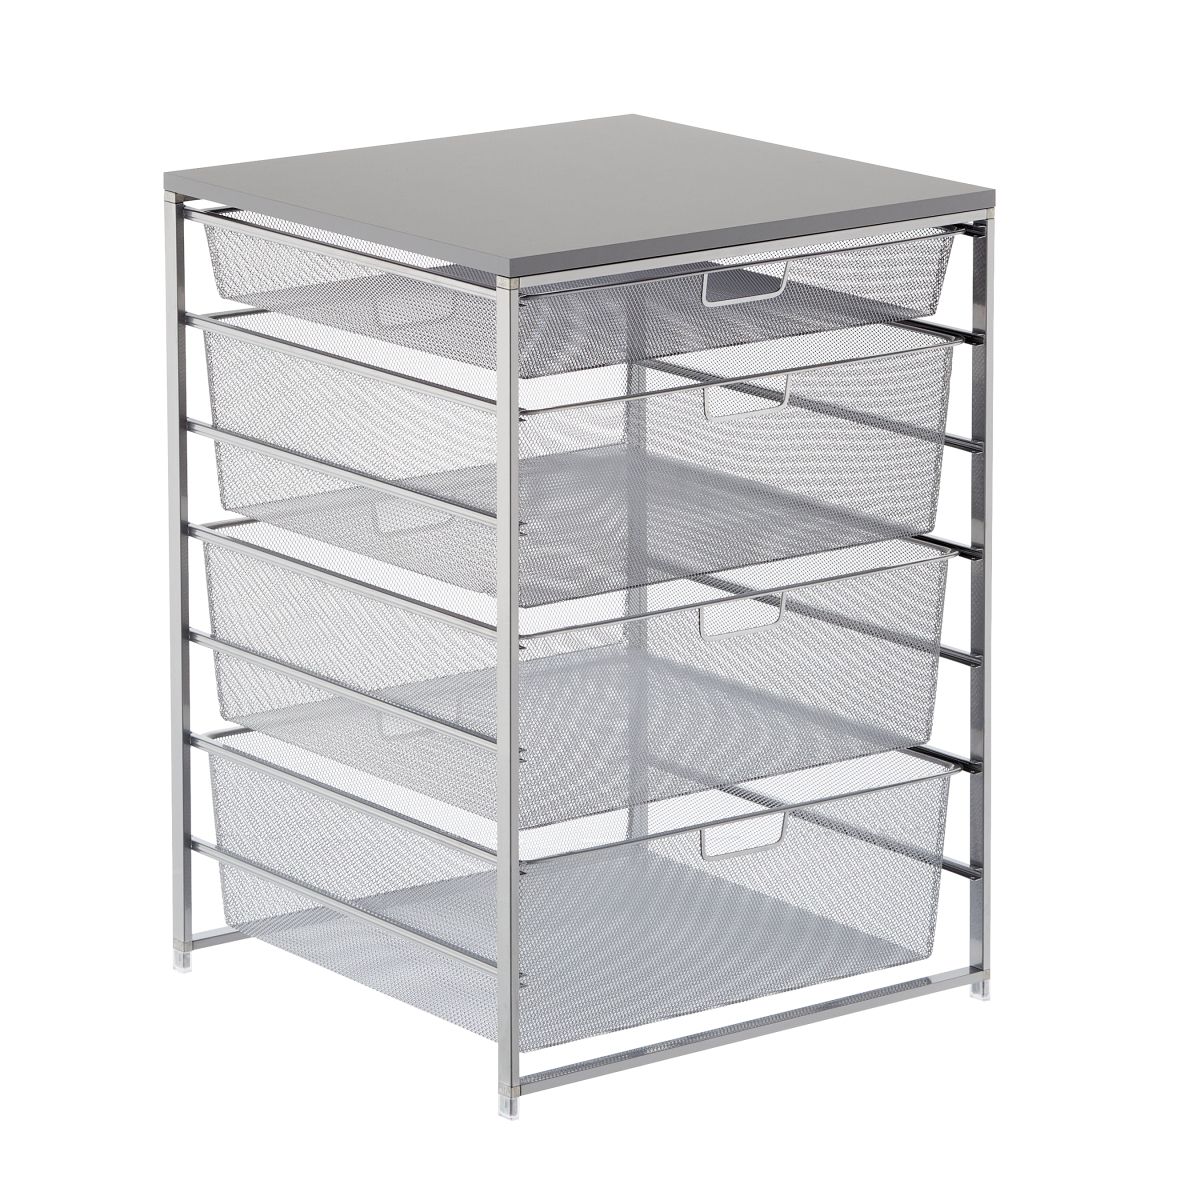 Elfa Mesh Closet Drawers | The Container Store